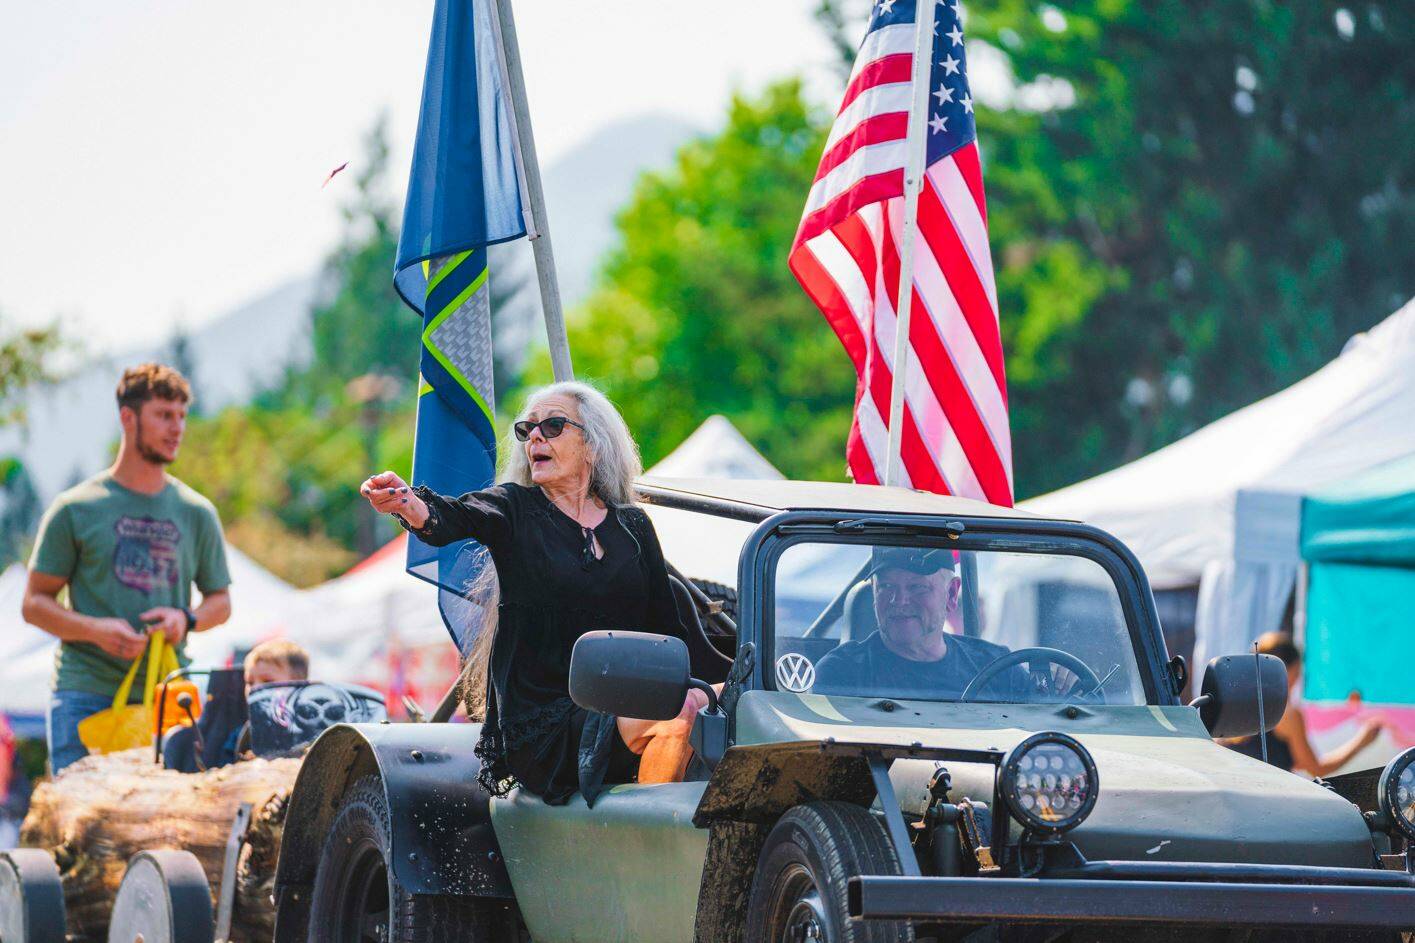 The 84th annual Snoqualmie Days festival Grand Parade held on Aug. 19. All Photos by Dylan Lockard unless noted.